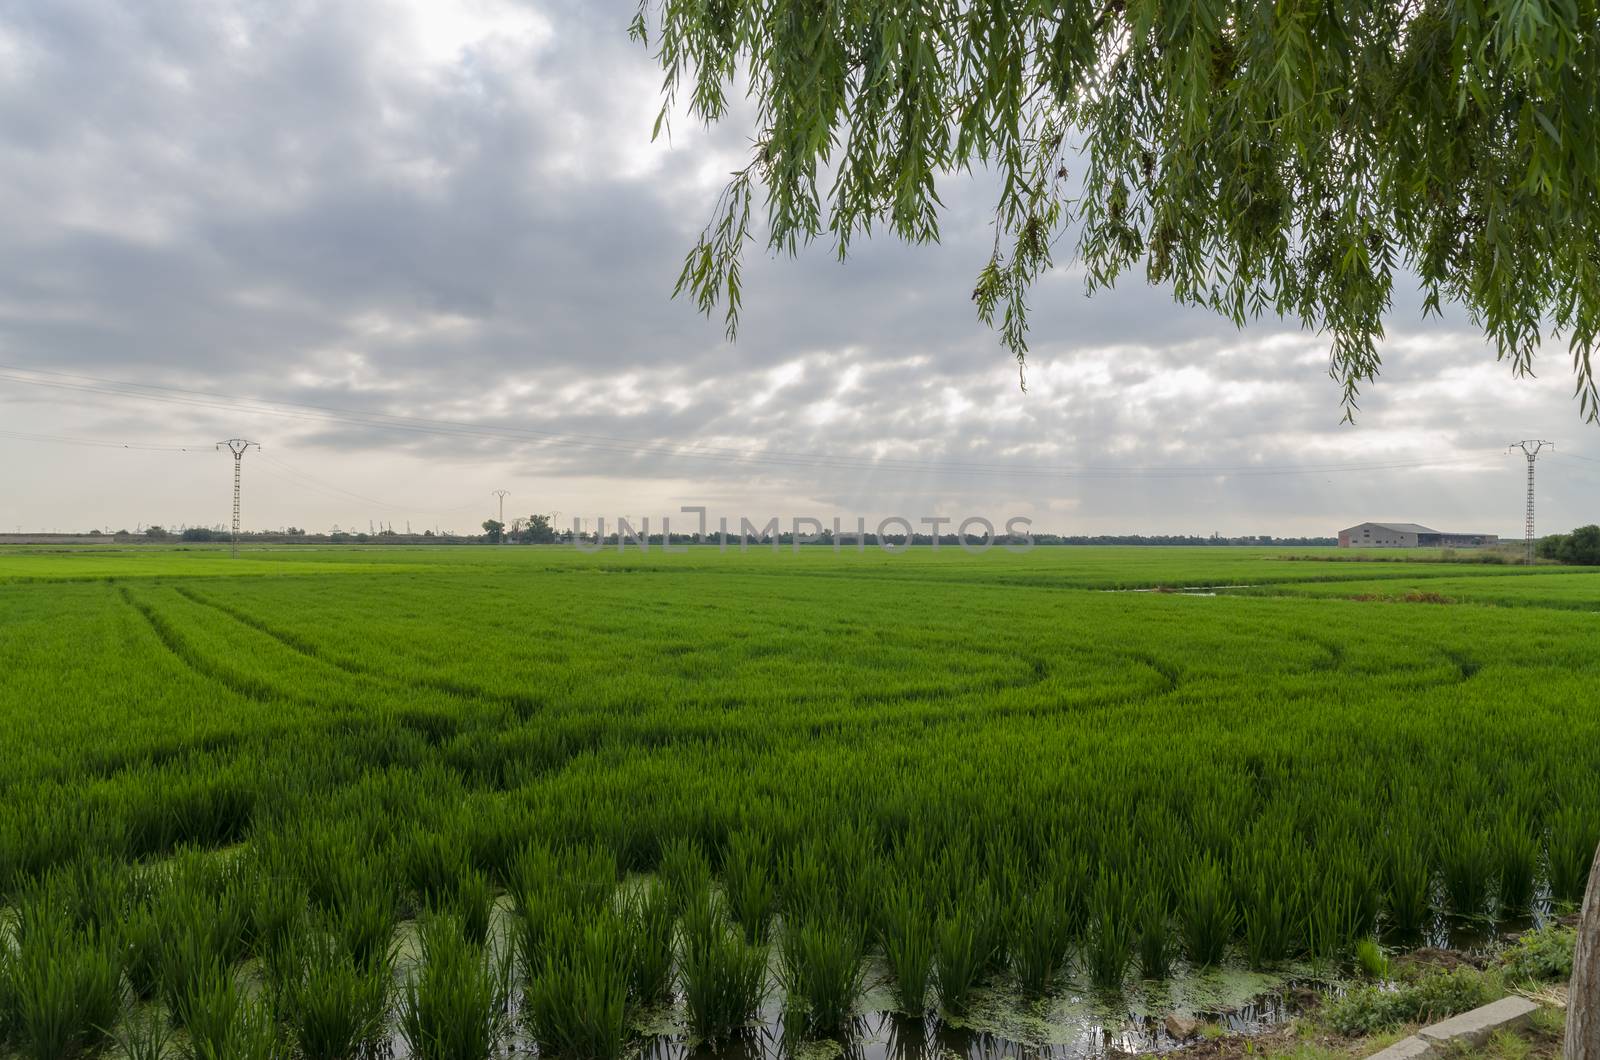 Green rice fields with cloudy skies in the port of Catarroja